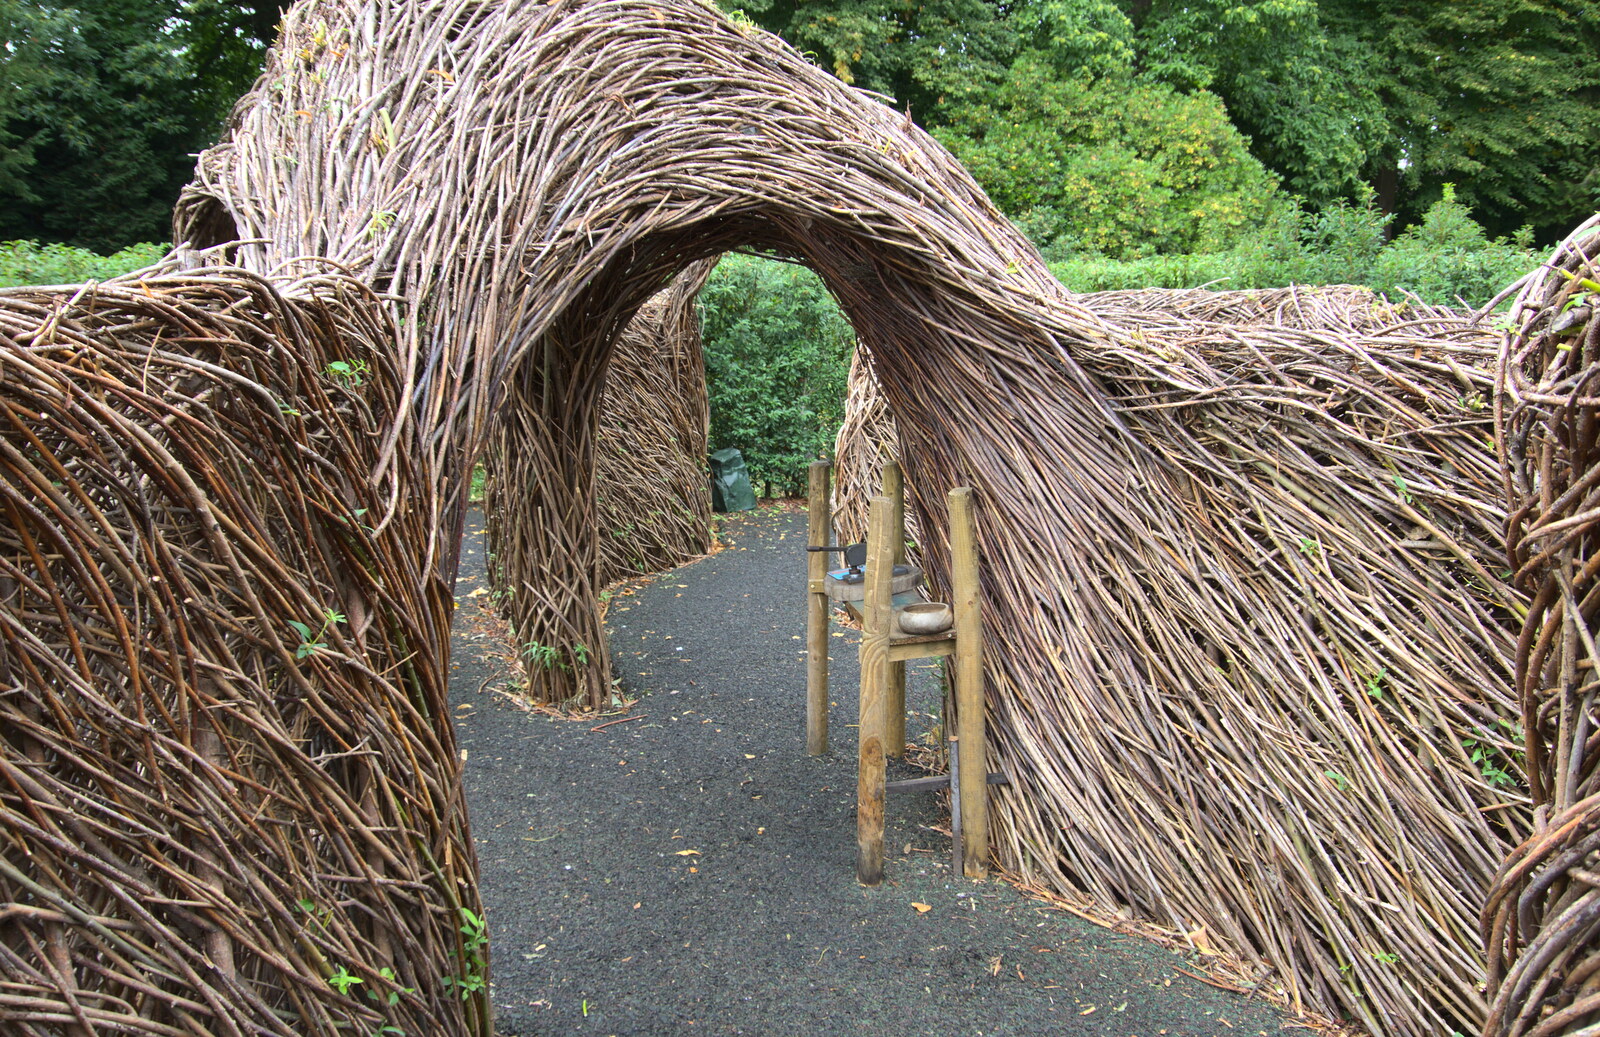 Nice weaved willow arches from A Day at Warwick Castle, Warwickshire - 8th September 2018